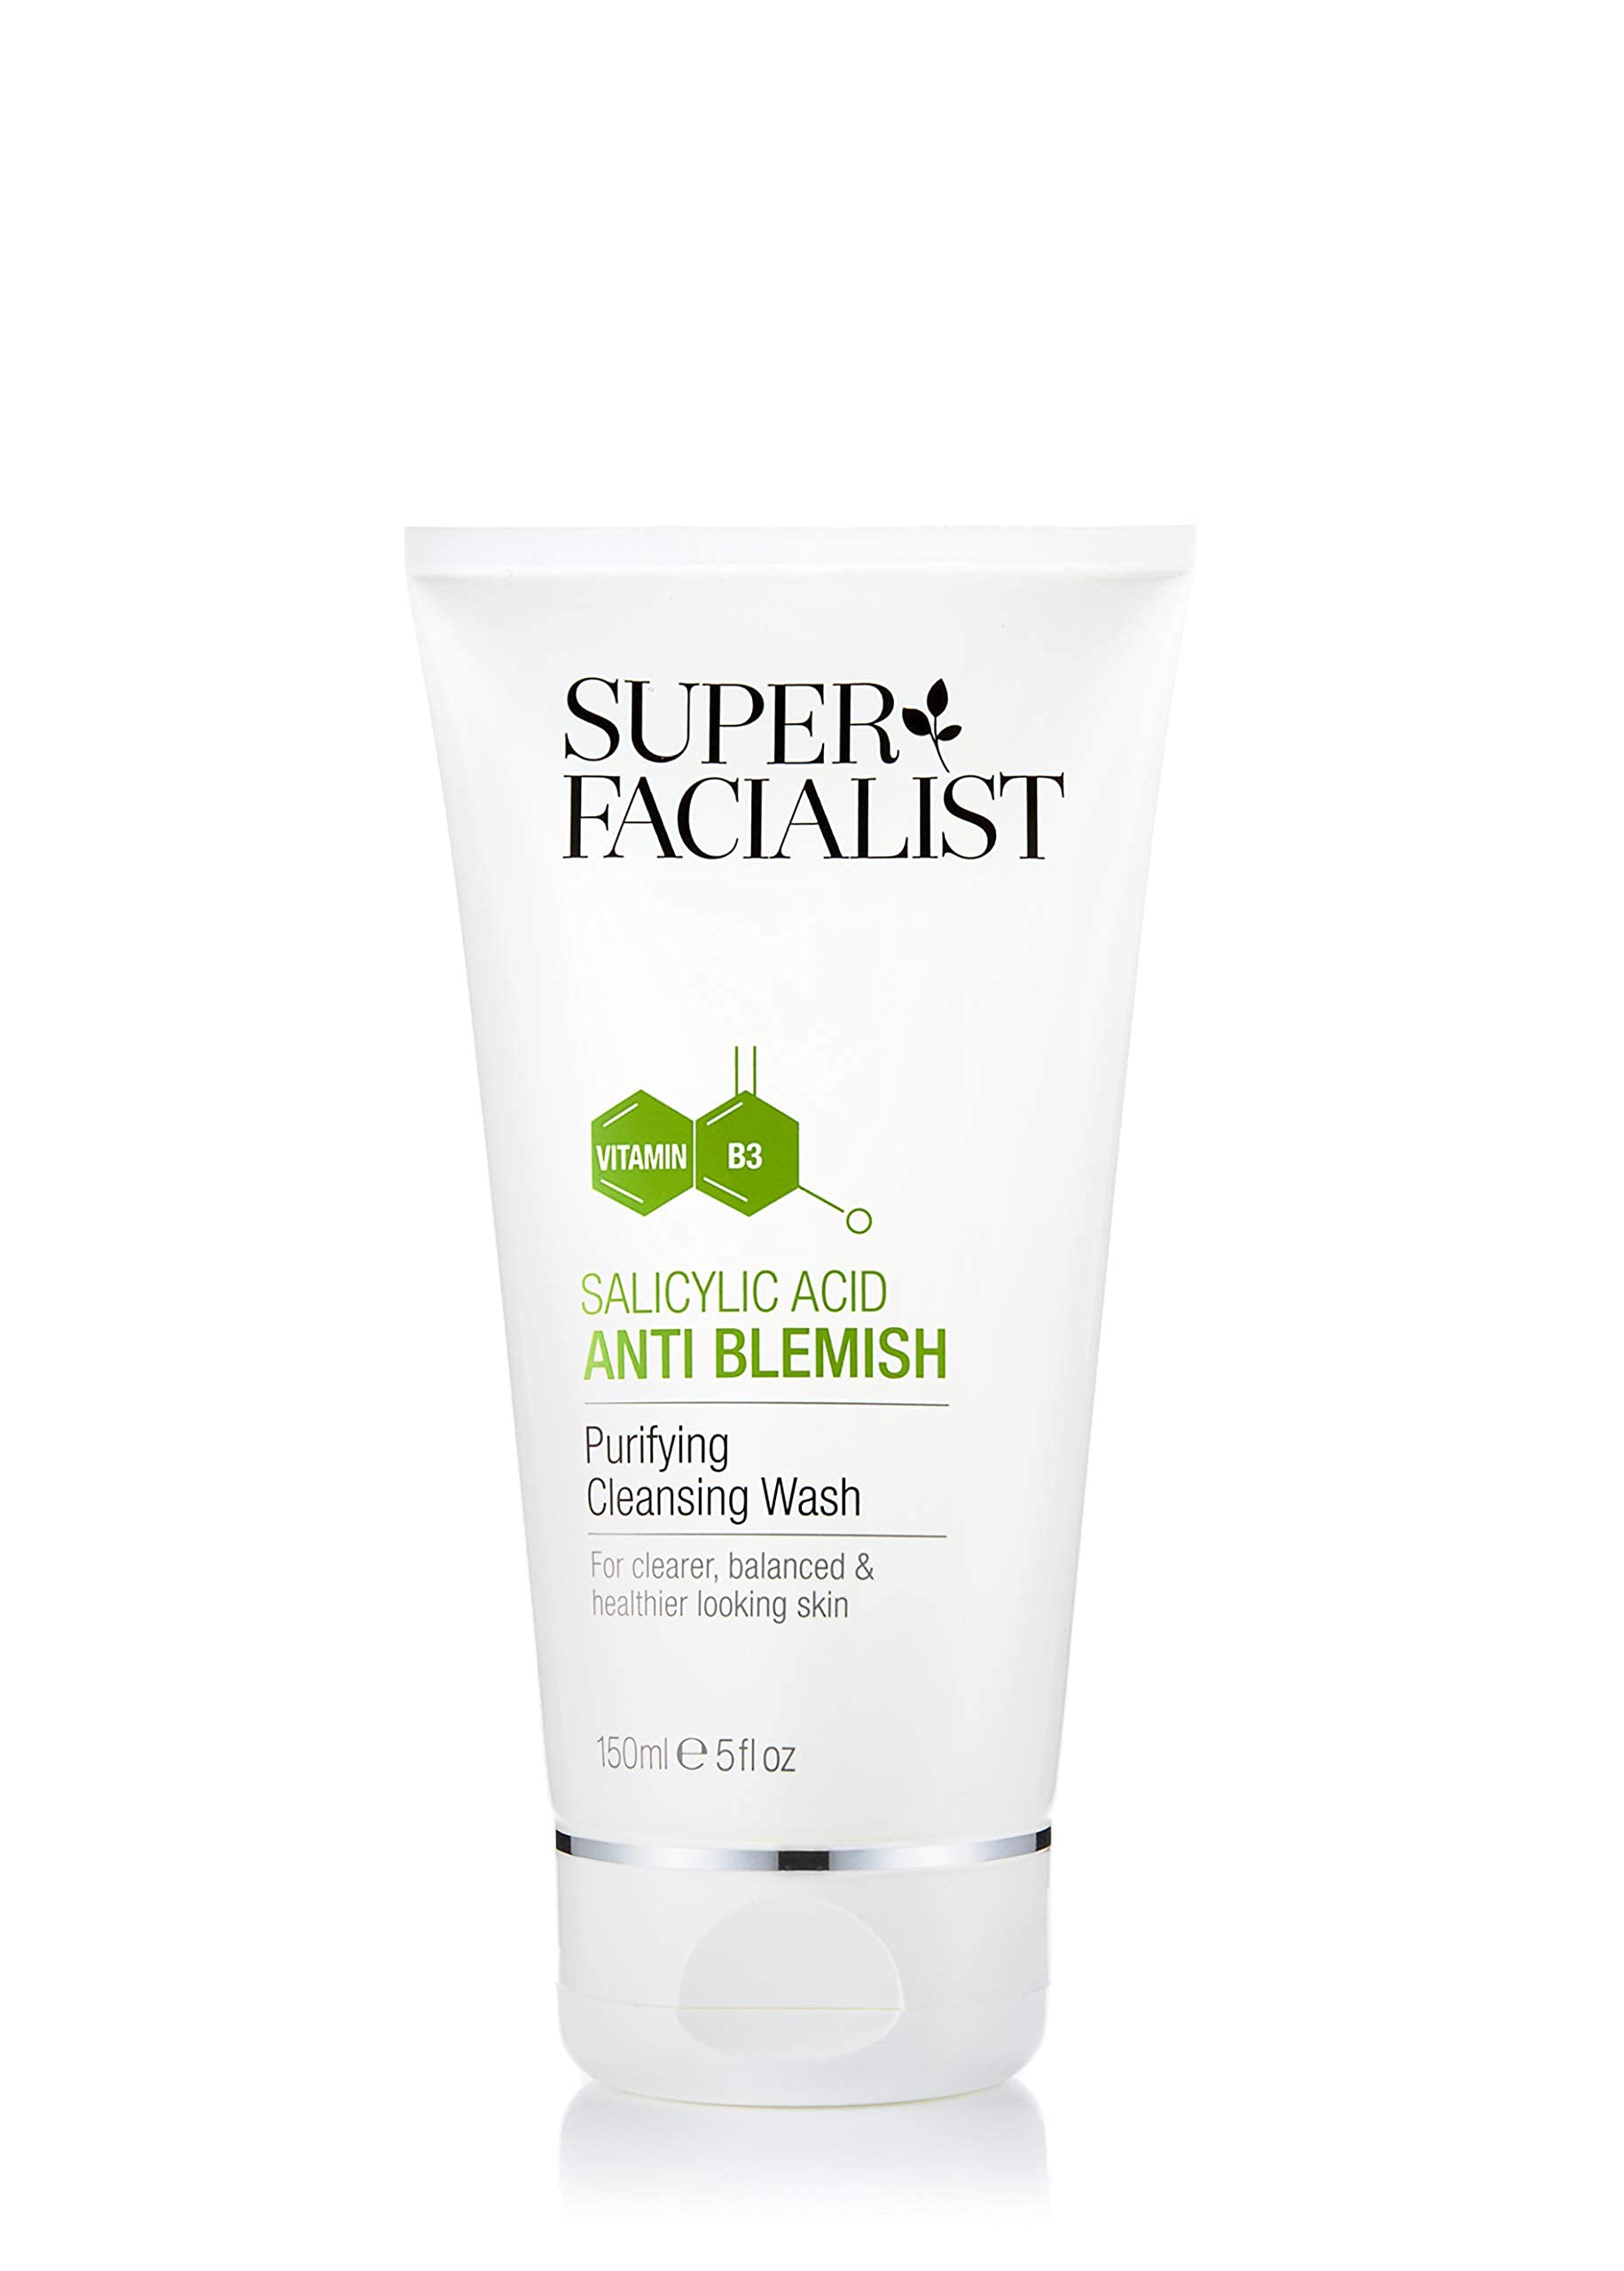 Super Facialist Anti Blemish Purifying Cleansing Wash - Gentle Foaming Gel Facial Cleanser with Salicylic Acid and Niacinamide (Vitamin B3), Infused with Elderflower, 150 ml